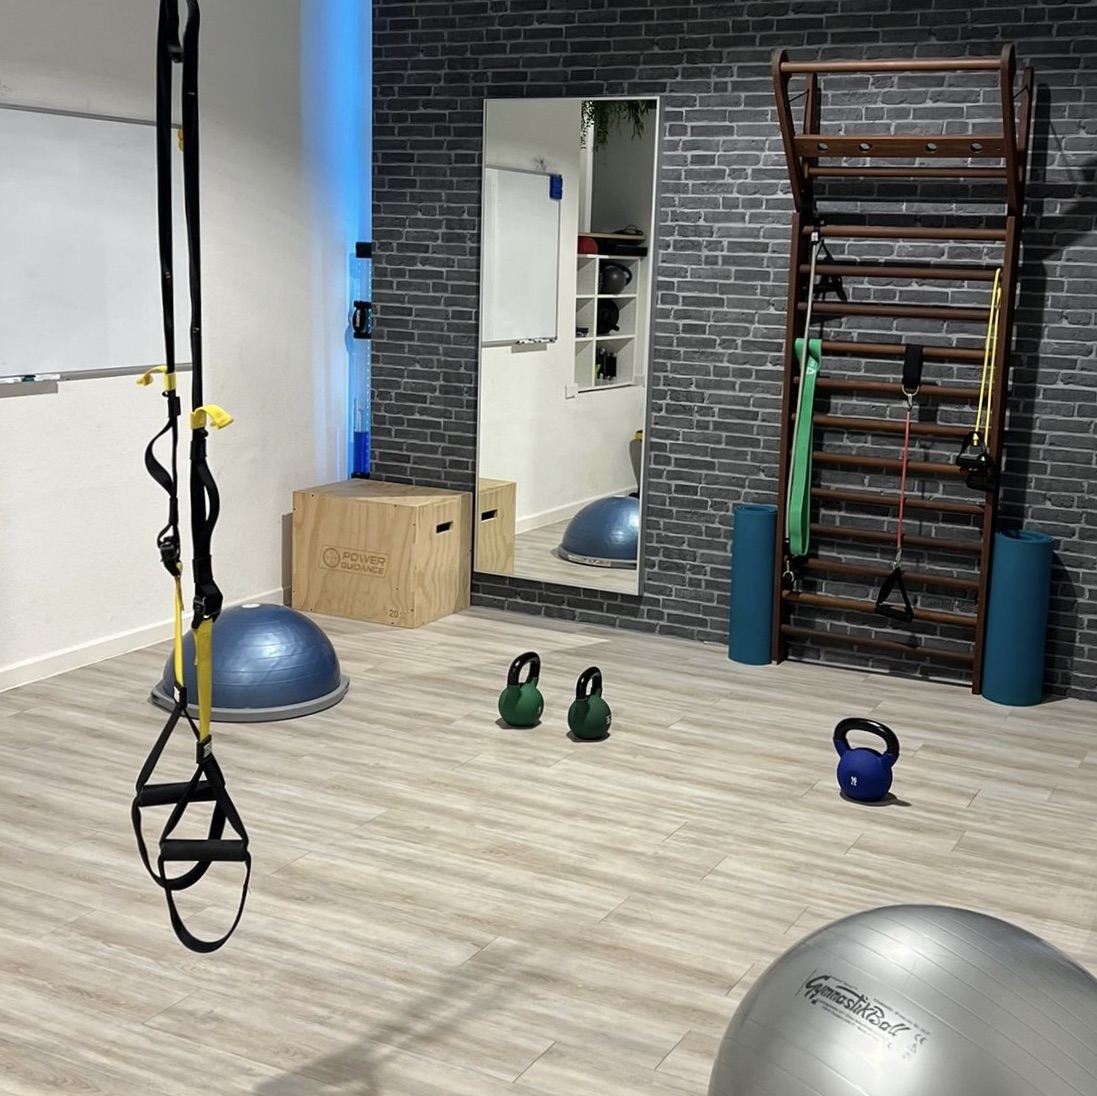 You can see a picture of the training studio.